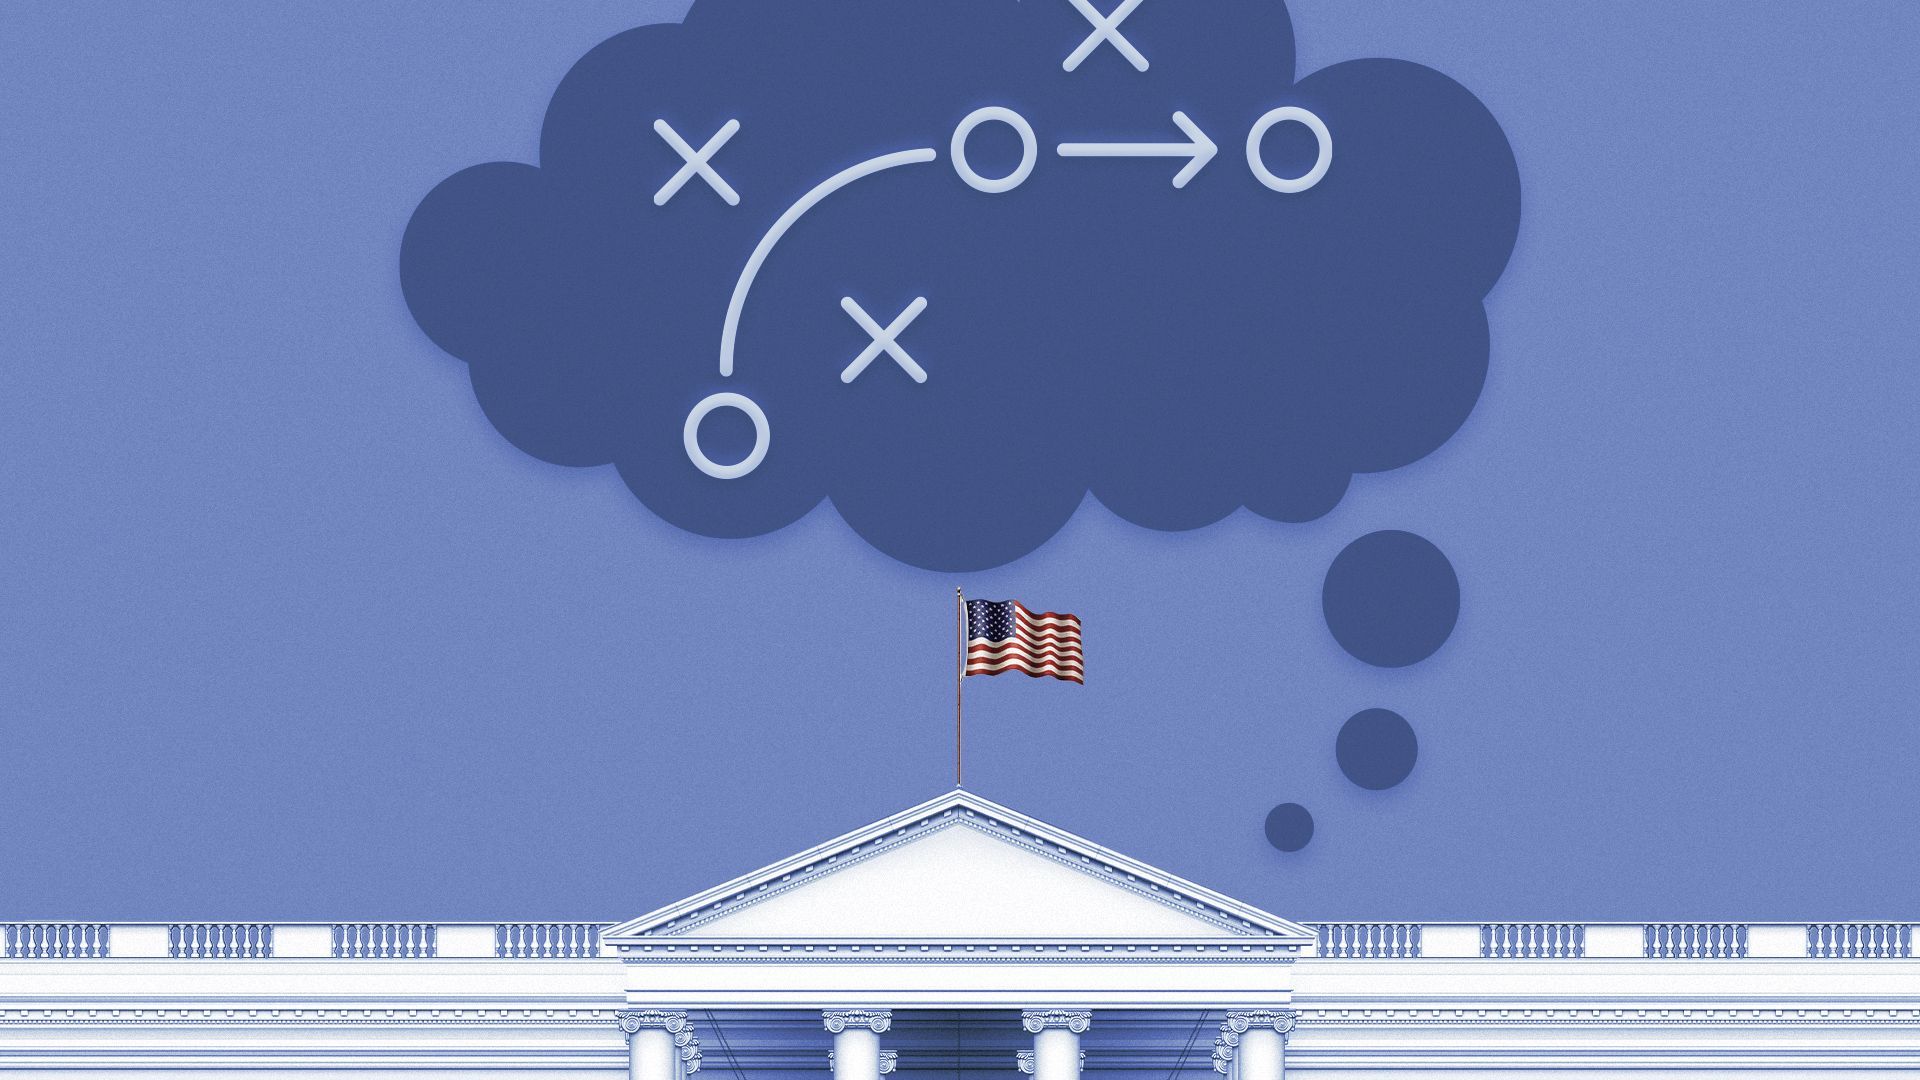 Illustration of the White House with a game strategy diagram in a thought bubble.